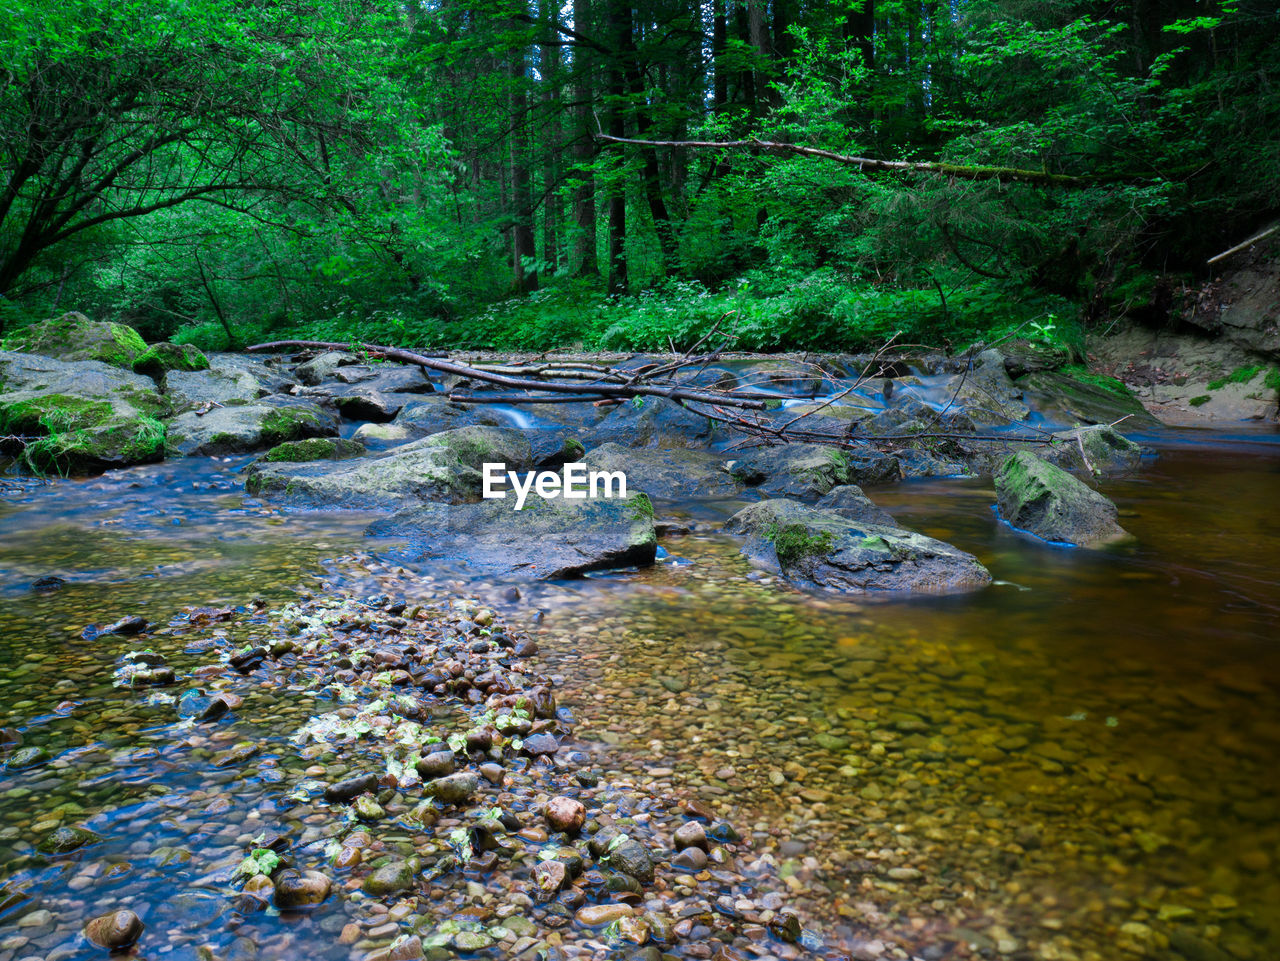 SCENIC VIEW OF STREAM FLOWING THROUGH FOREST